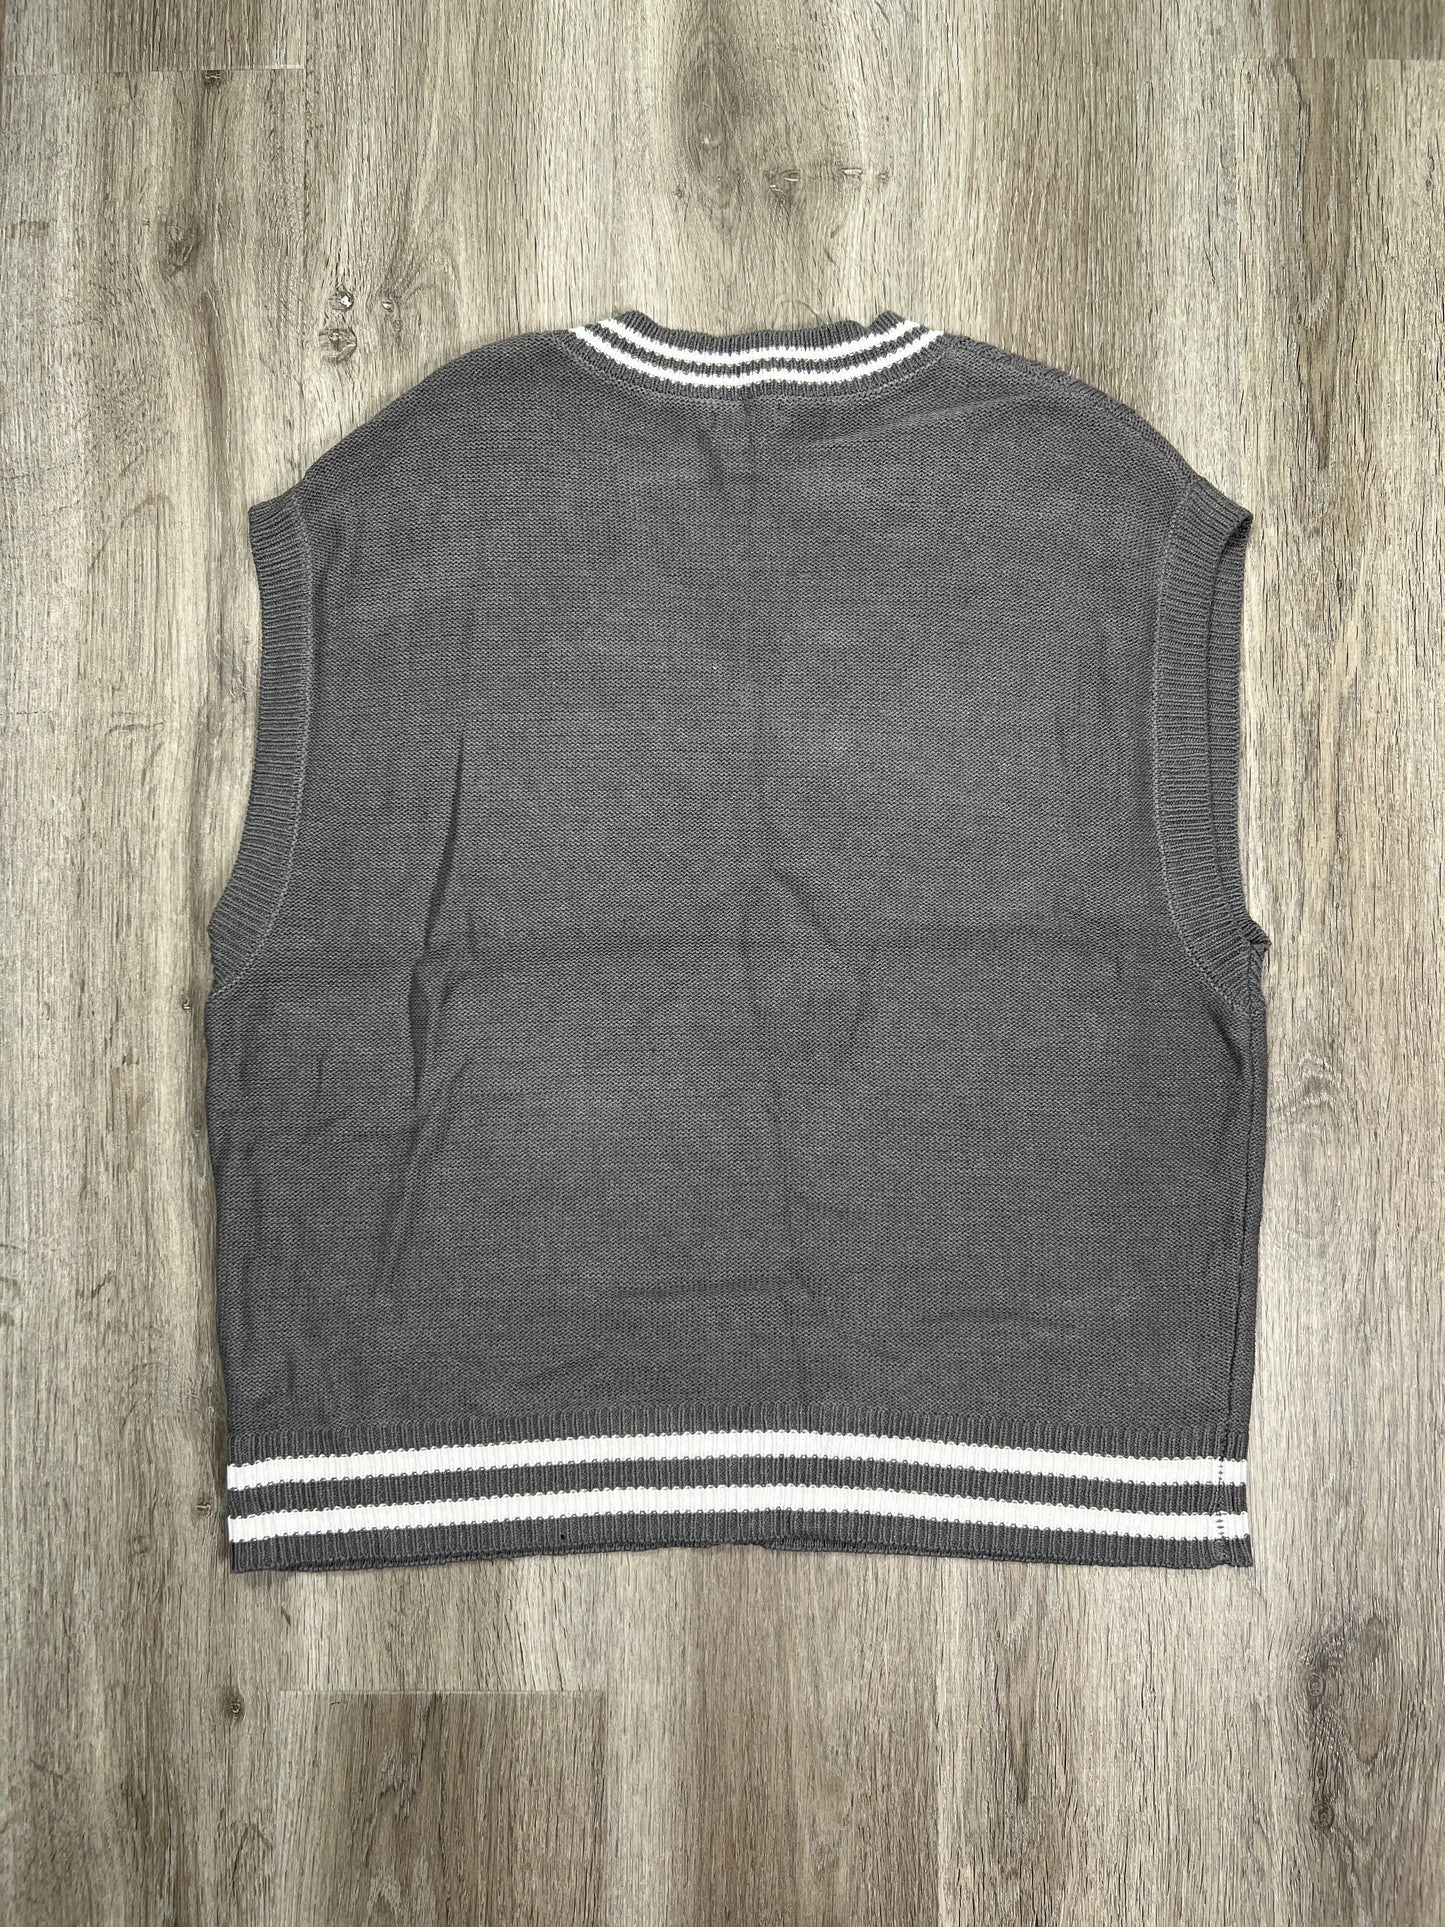 Grey Vest Sweater Wild Fable, Size L